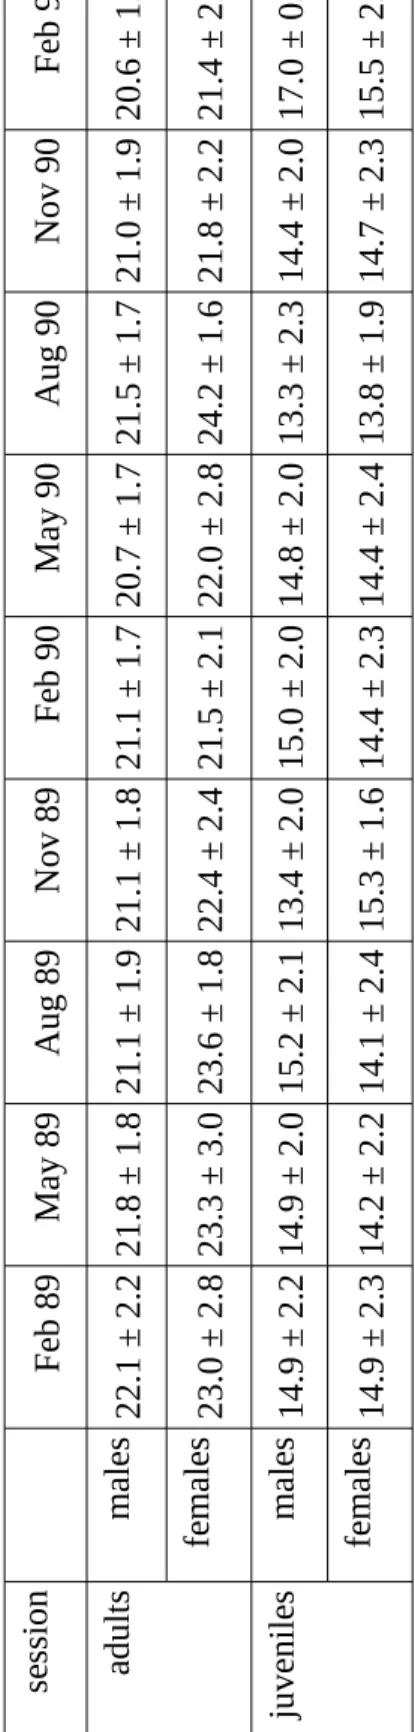 Table 1. Mean body weight of the caught voles in each trapping-session (mean ± standard  deviation) Feb 91 20.6 ± 1.4 21.4 ± 2.3 17.0 ± 0.0 15.5 ± 2.6 Nov 90 21.0 ± 1.9 21.8 ± 2.2 14.4 ± 2.0 14.7 ± 2.3 Aug 90 21.5 ± 1.7 24.2 ± 1.6 13.3 ± 2.3 13.8 ± 1.9 May